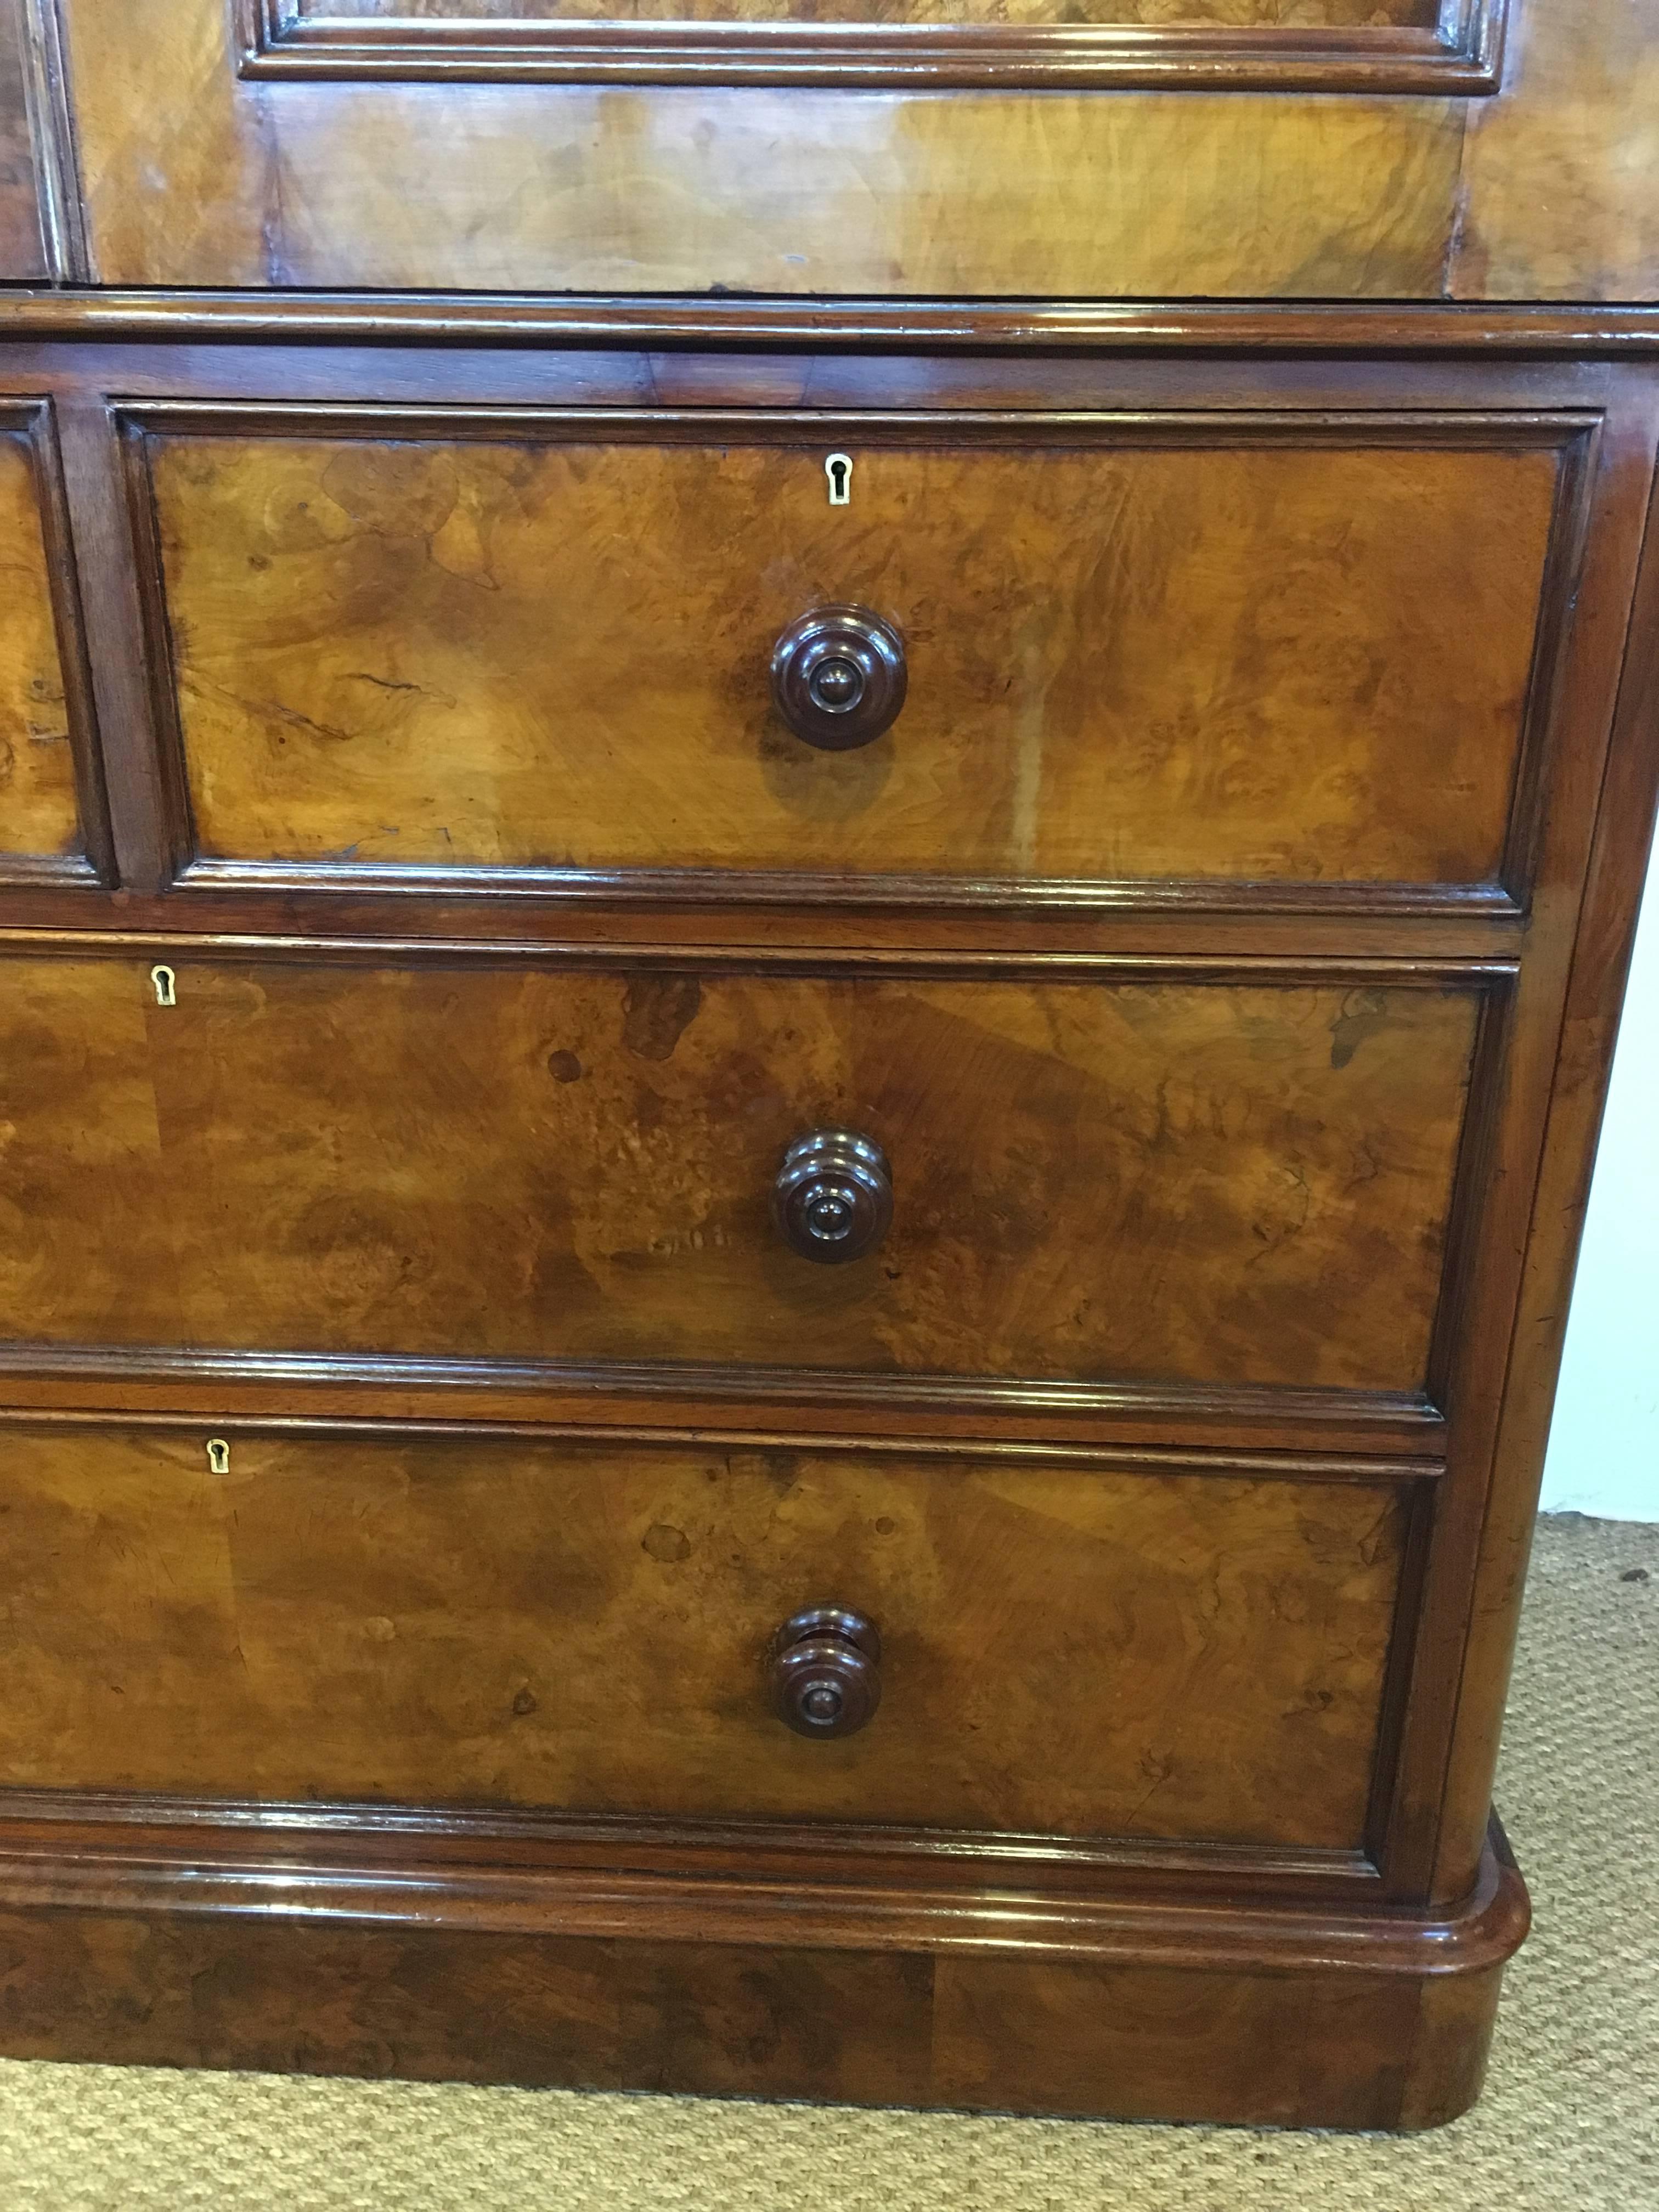 Wonderful mid-19th century figured walnut linen press 

English dating to around the 1850s , the whole piece veneered with fabulous figured walnut 

The top section has been very cleverly adapted at some stage of its life to half linen press and